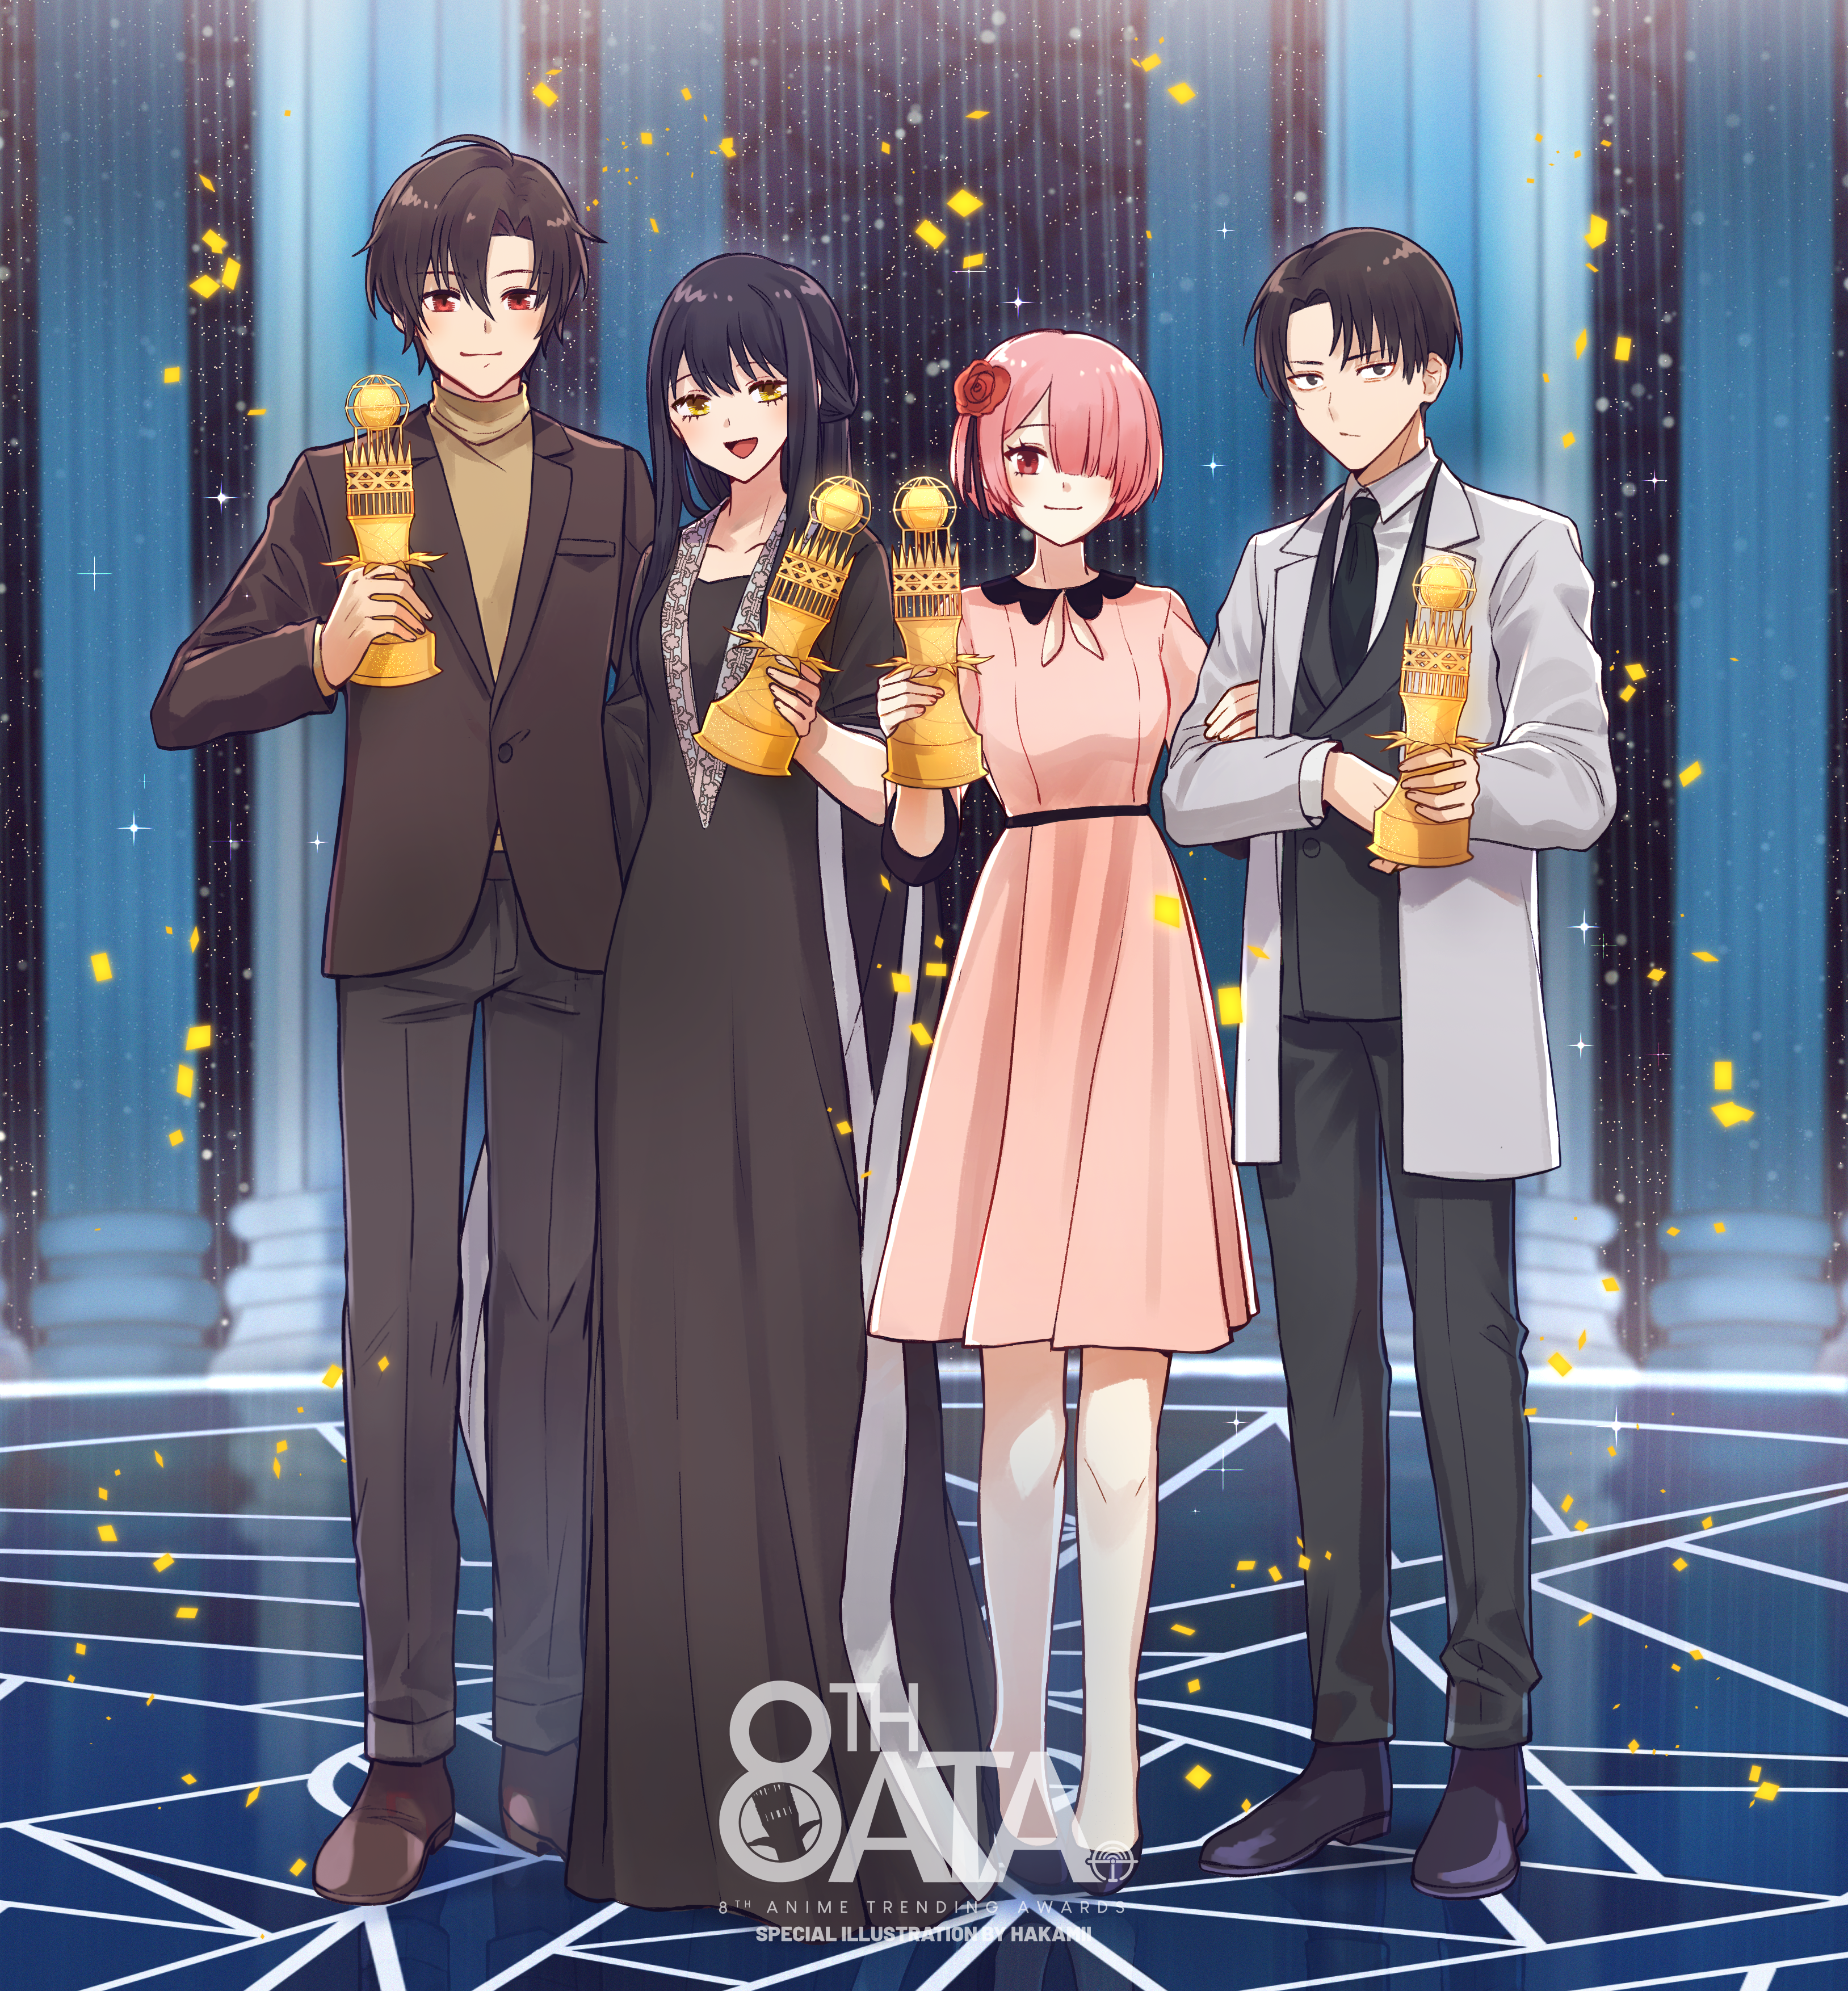 Shinei, Miko, Ram, Levi are the 2021 Characters of the Year at the 8th Anime Trending Awards!